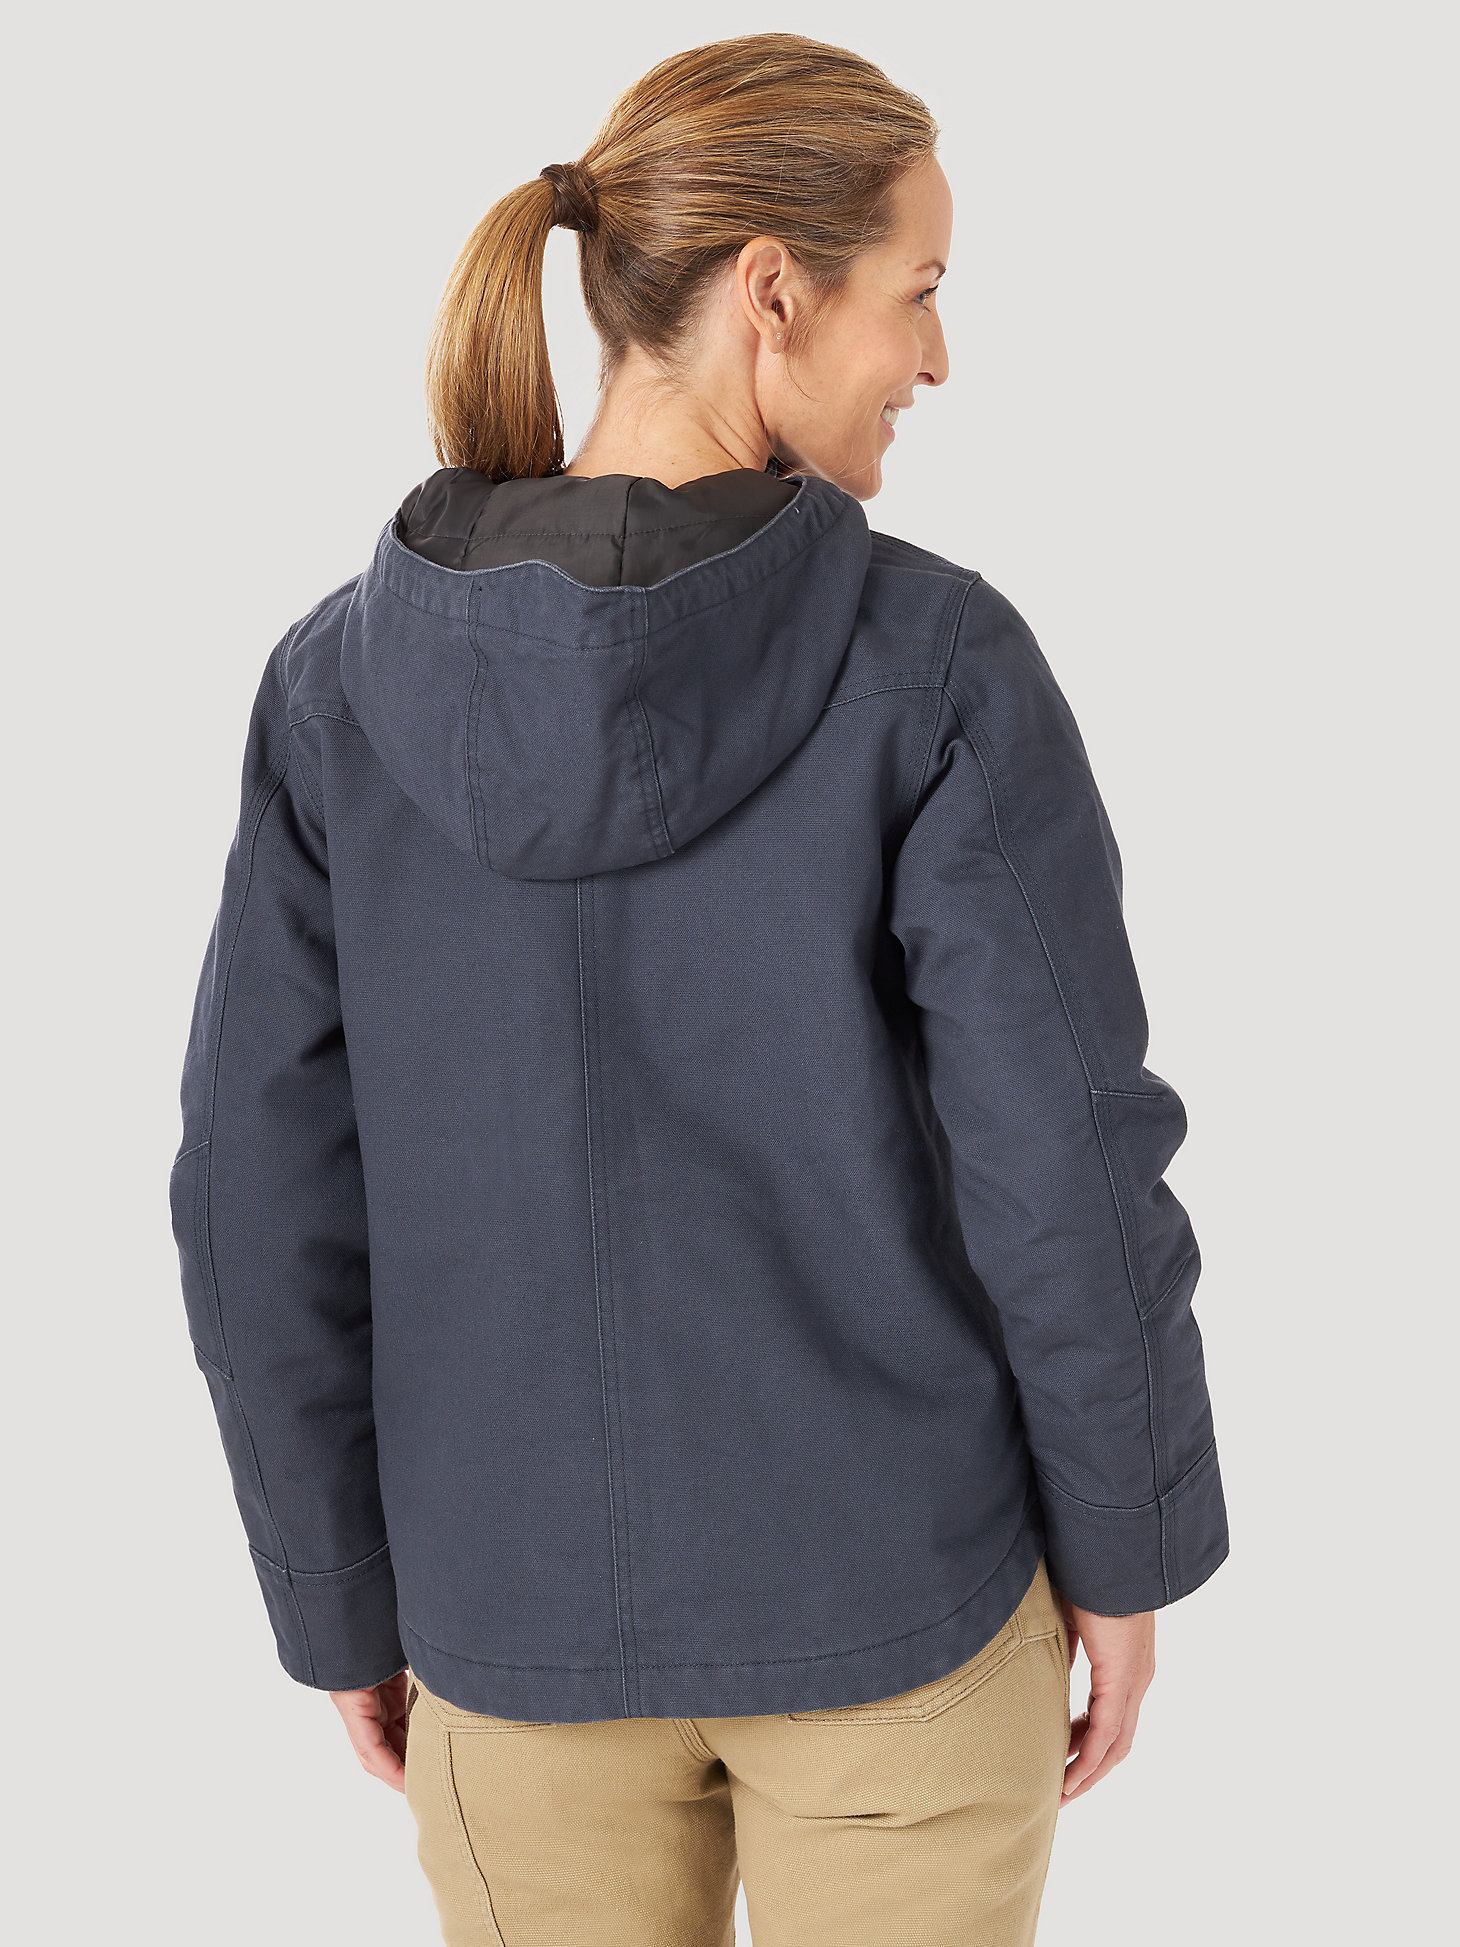 Women's Wrangler® RIGGS Workwear® Tough Layers Insulated Canvas Work Jacket in Ink alternative view 1